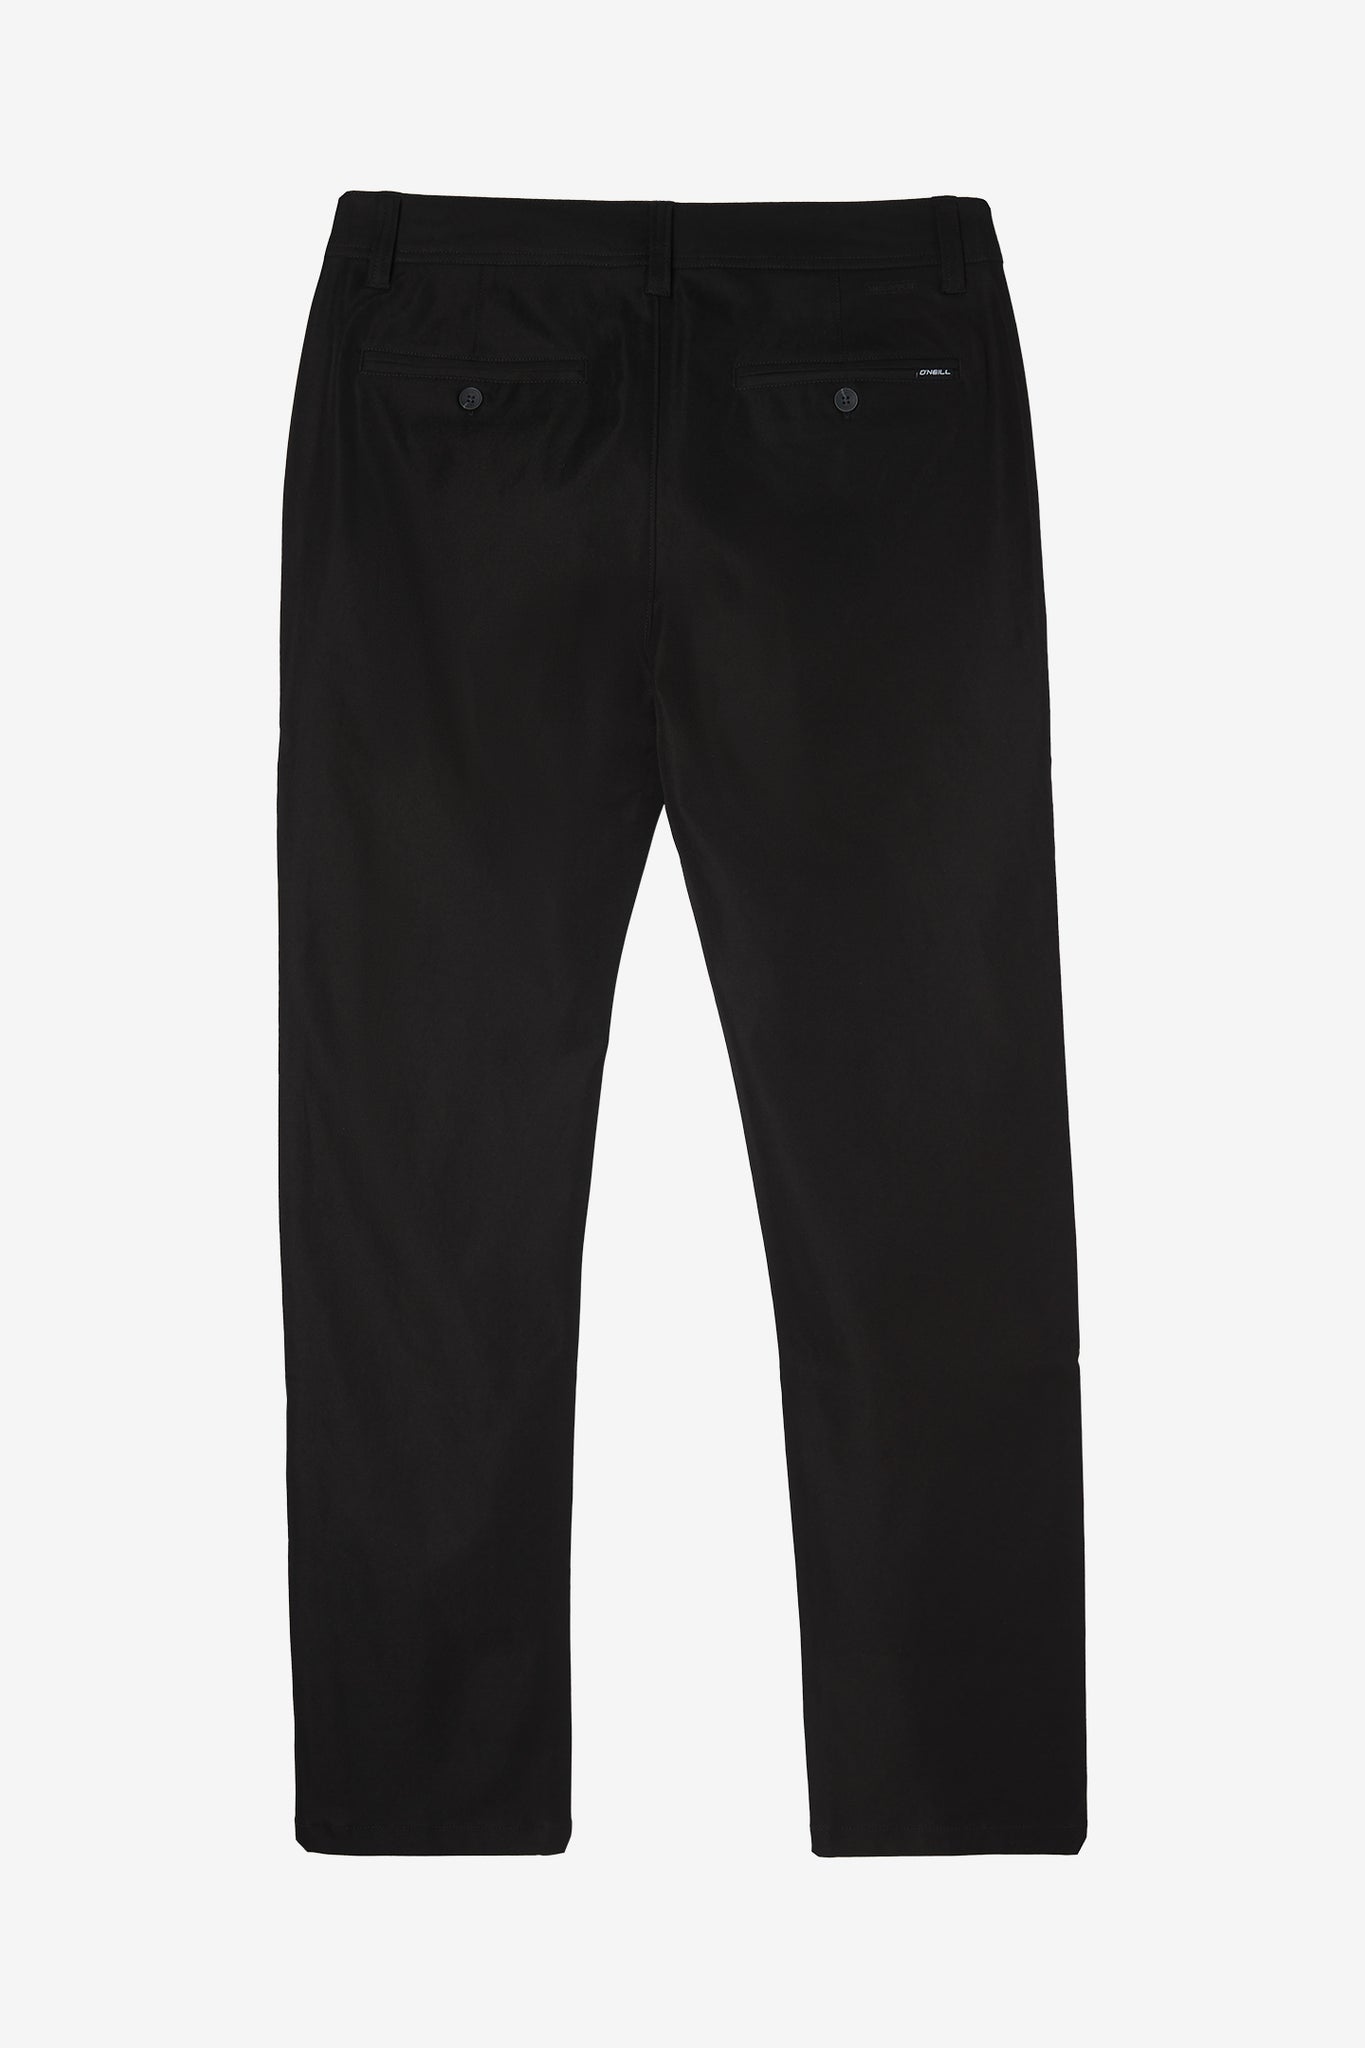 M'S SYNCH PANTS BLACK – Alohasurfmanly